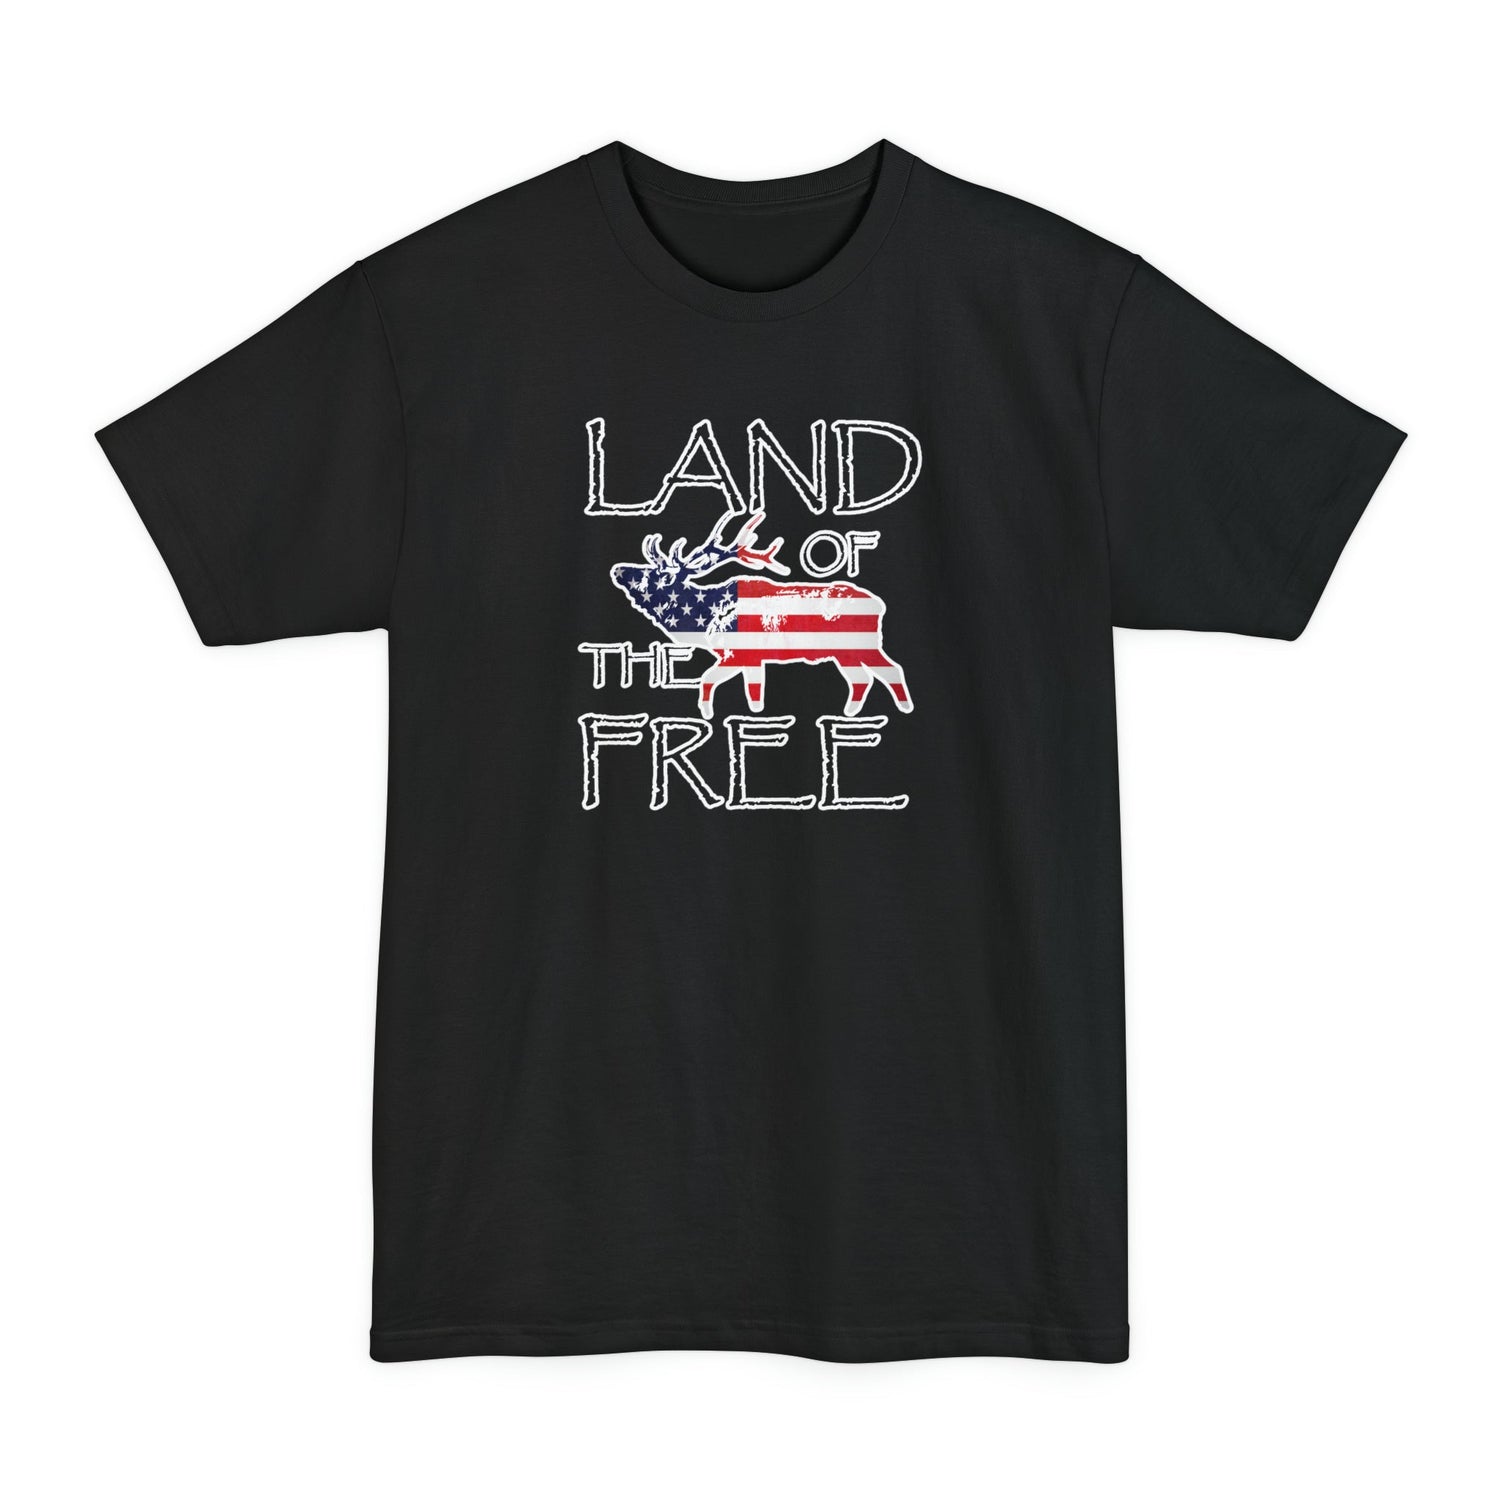 Big and tall patriotic elk hunting t-shirt, color black, front design placement